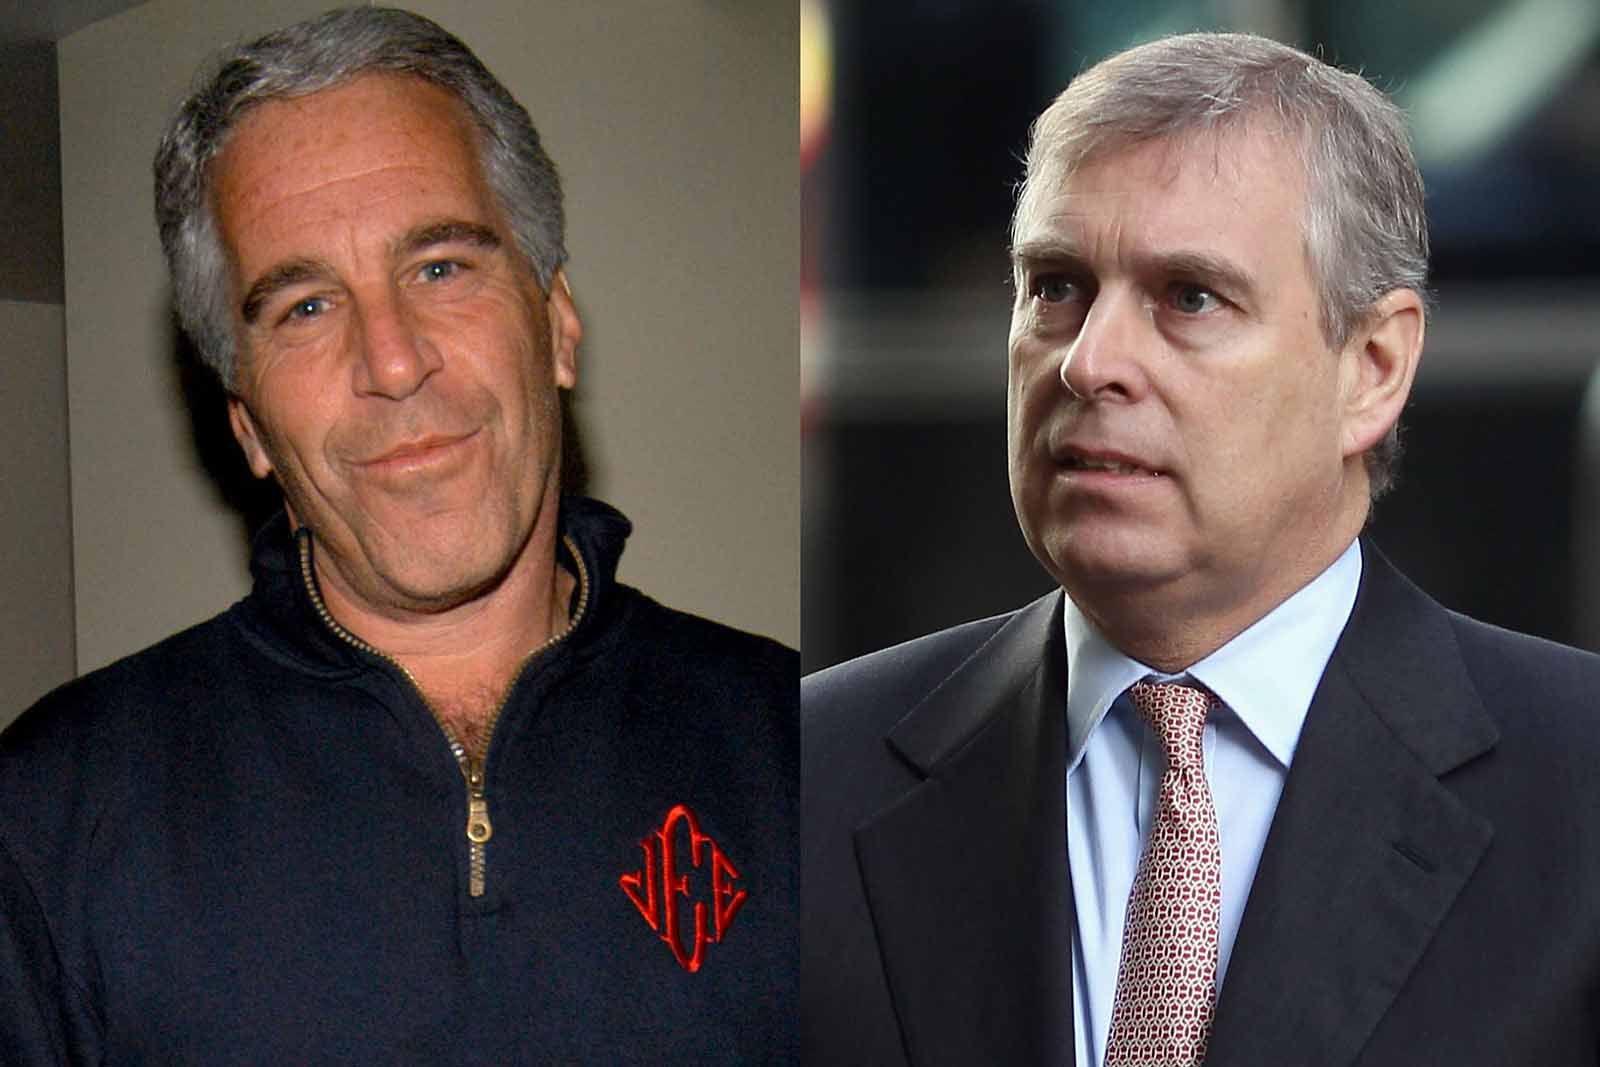 With the release of numerous documents thanks to the Ghislaine Maxwell case, we now know that Jeffrey Epstein got less jail time thanks to Prince Andrew. 